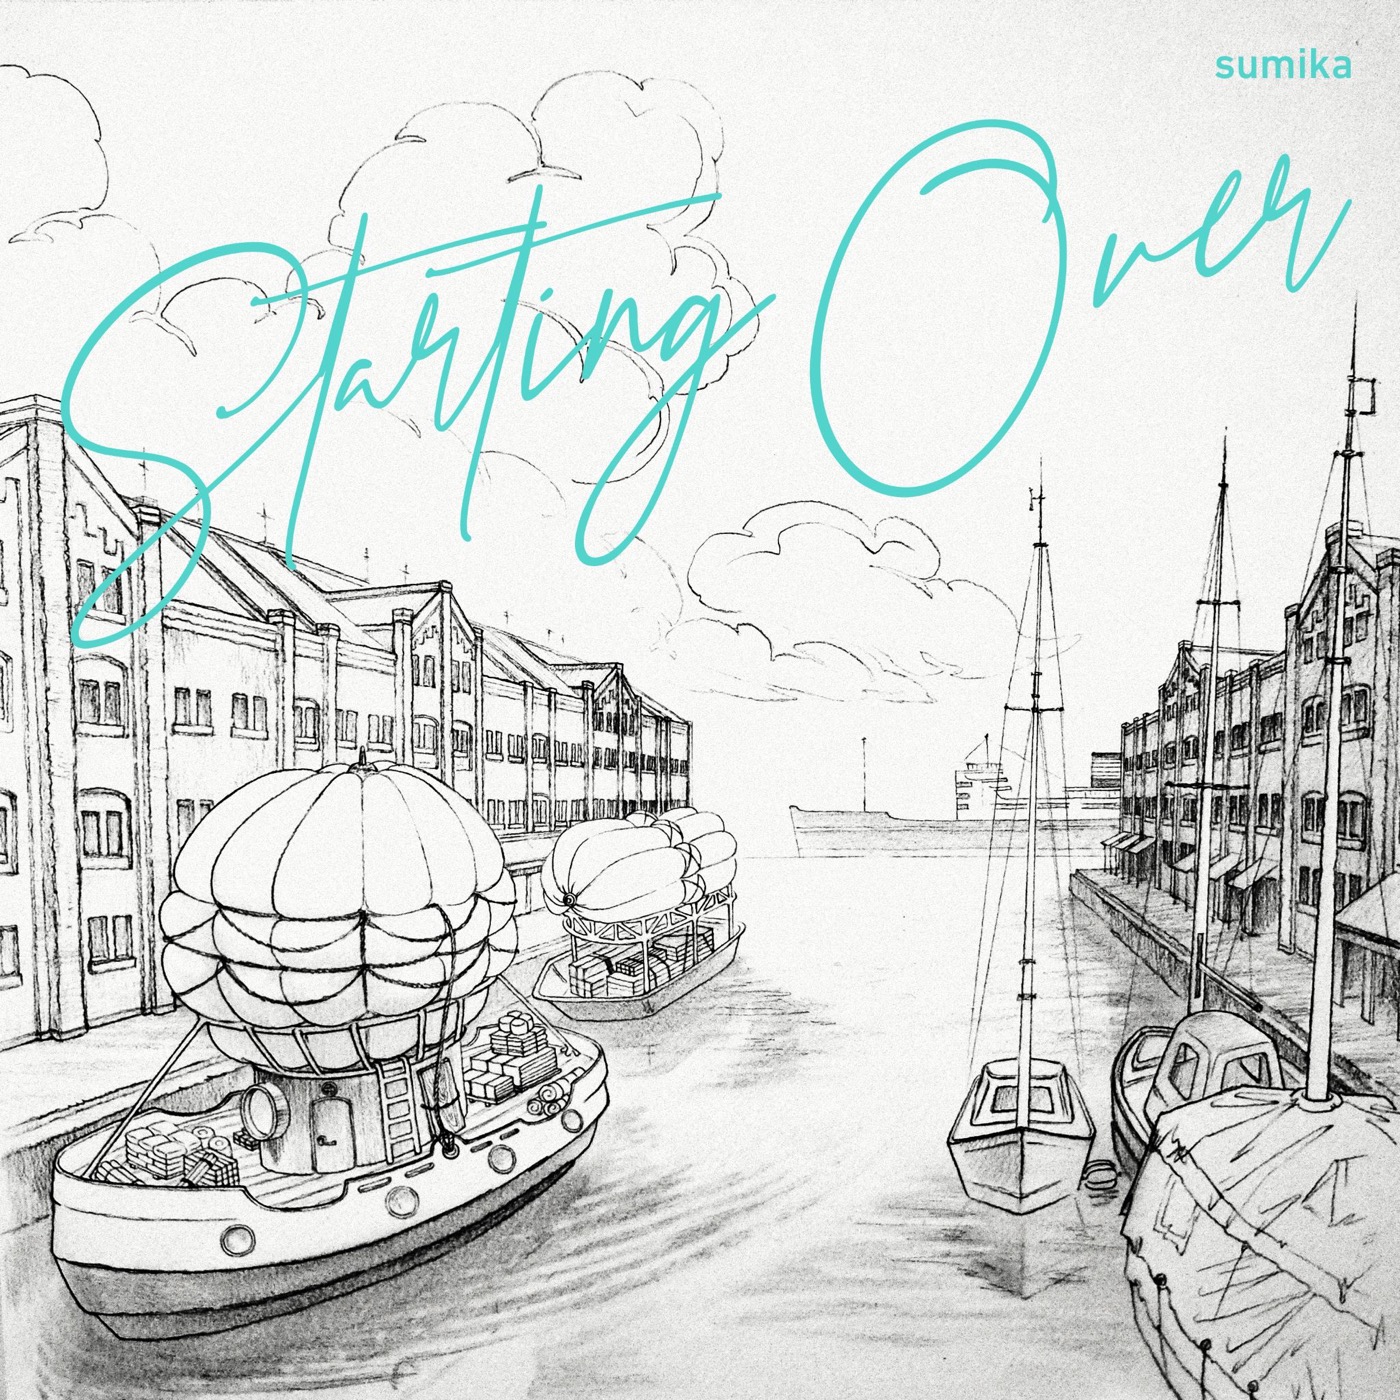 sumika、TVアニメ『MIX MEISEI STORY』OP曲「Starting Over」のCDリリース決定 - 画像一覧（1/2）